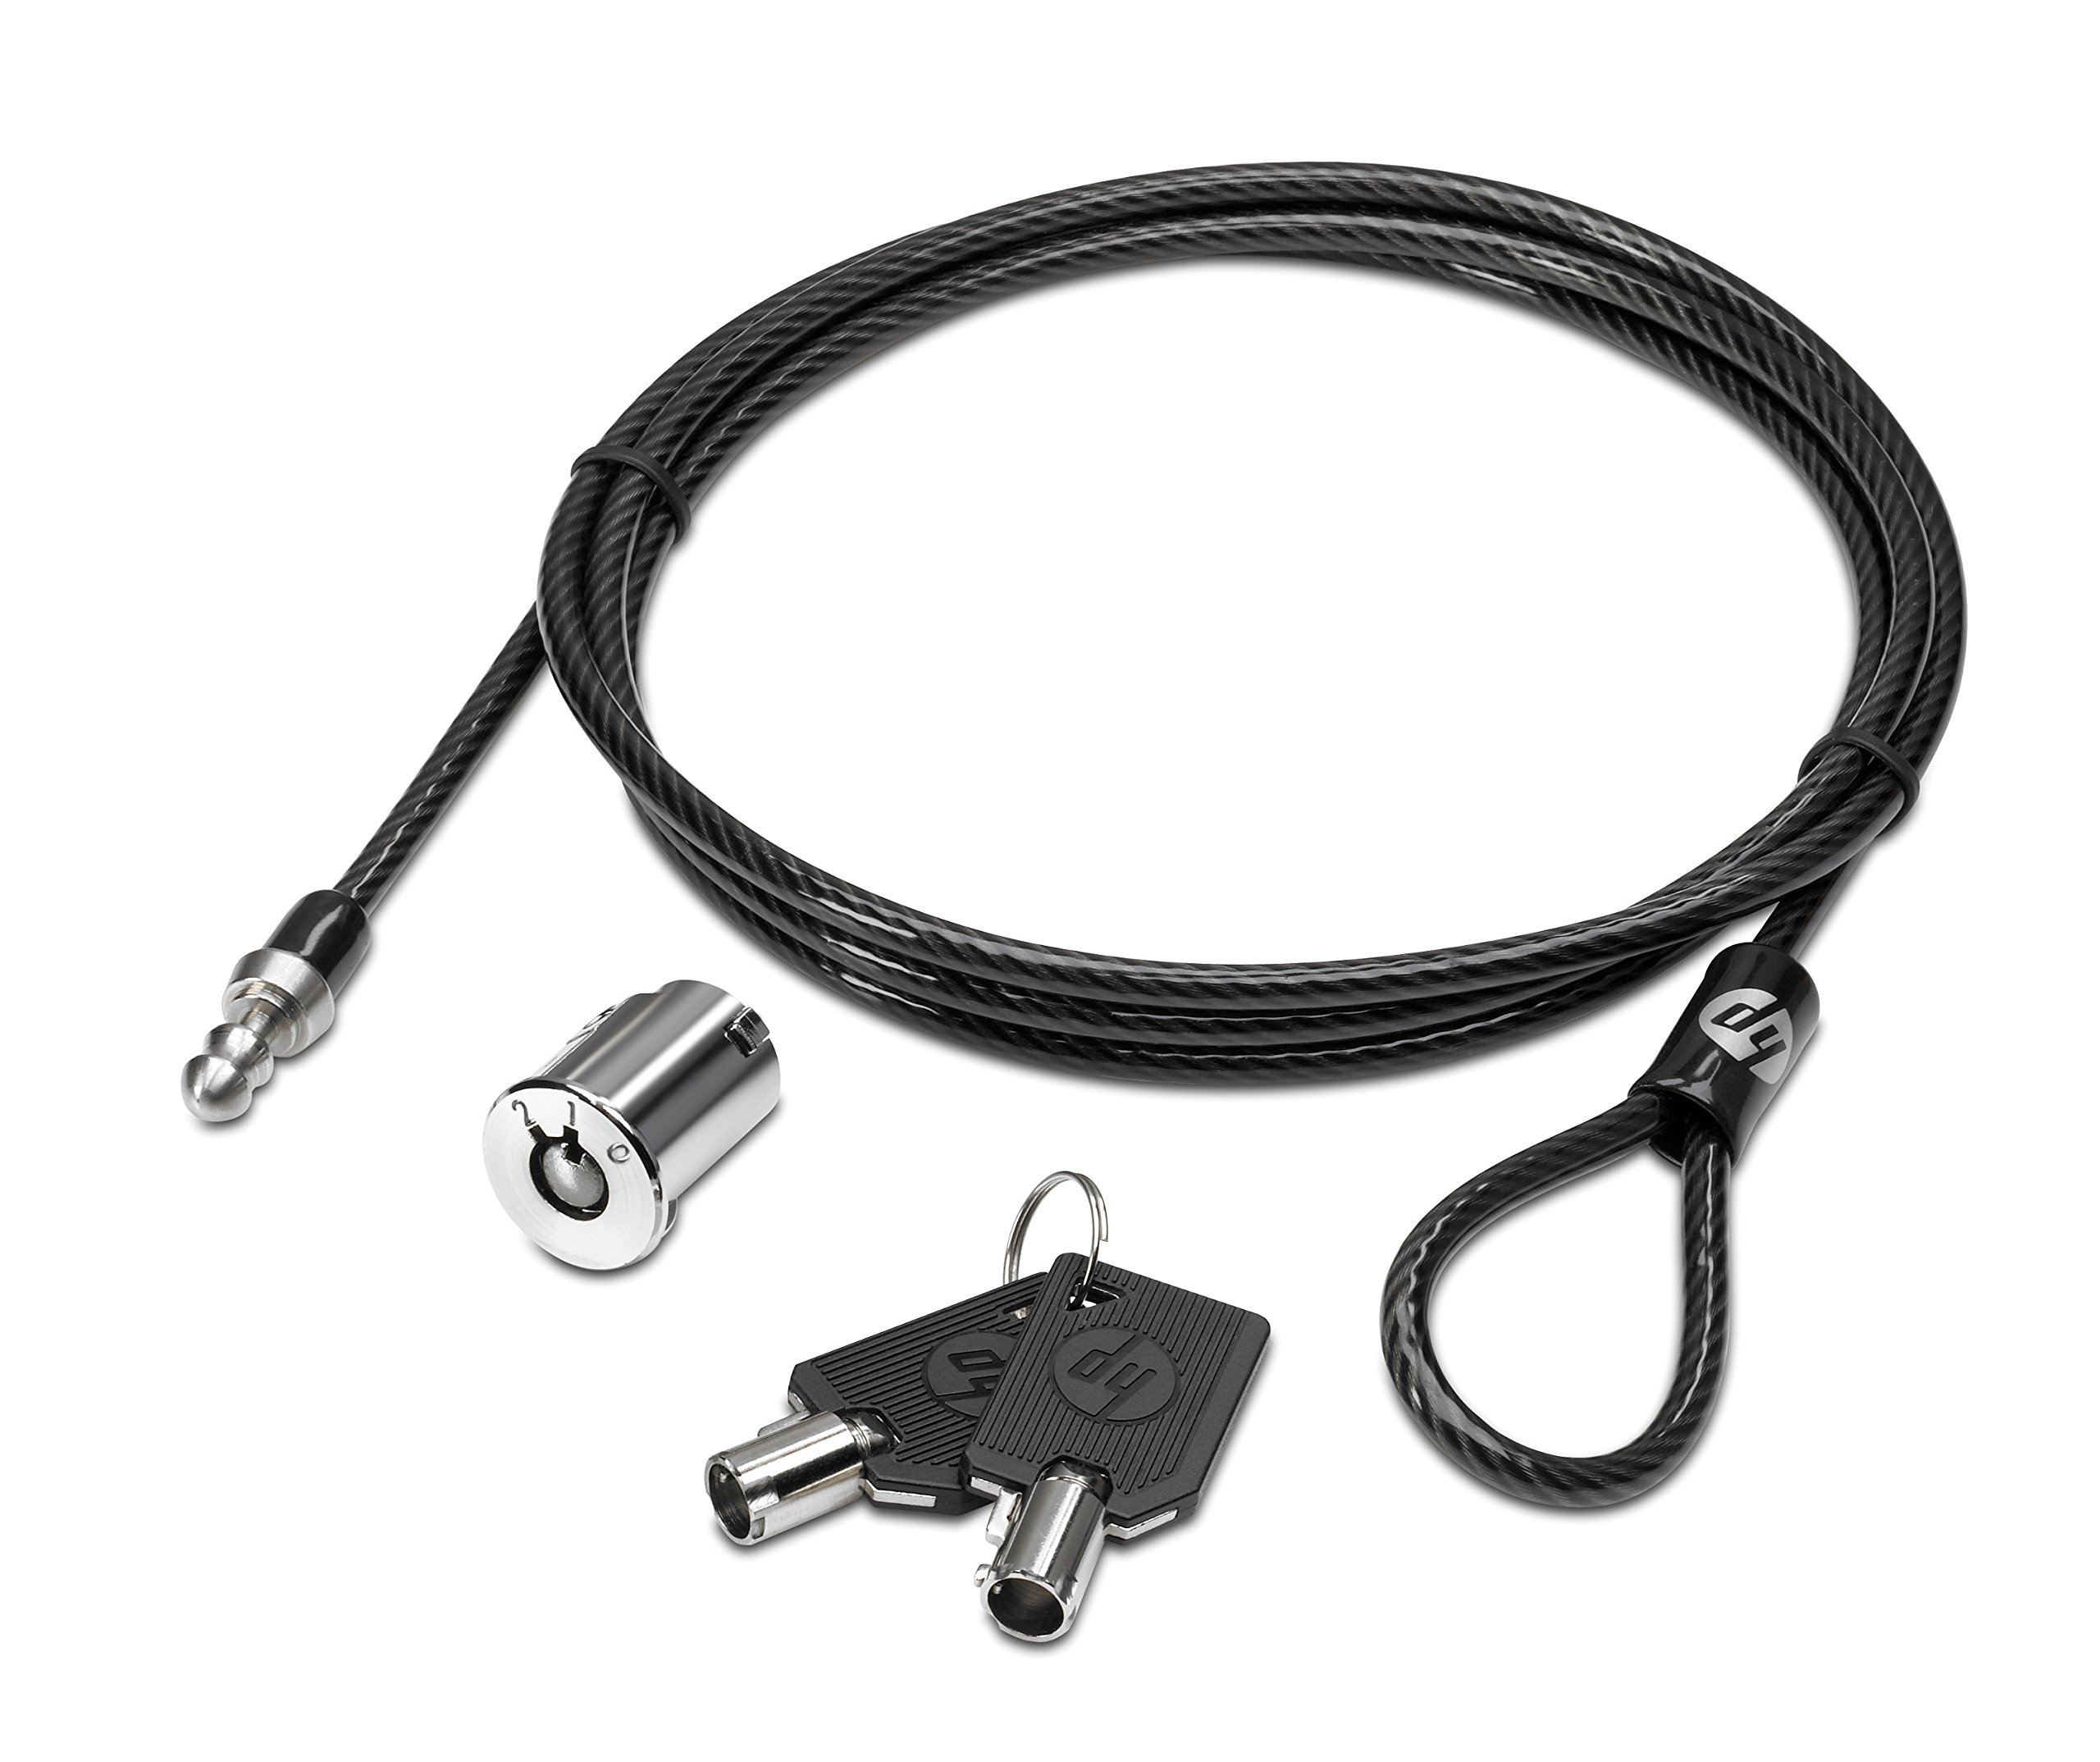 HP AU656AA - Cable antirrobo (Negro, Metálico, 250g, HP EliteBook Notebook PC HP ProBook Notebook PC HP 120W Advanced Docking Station)